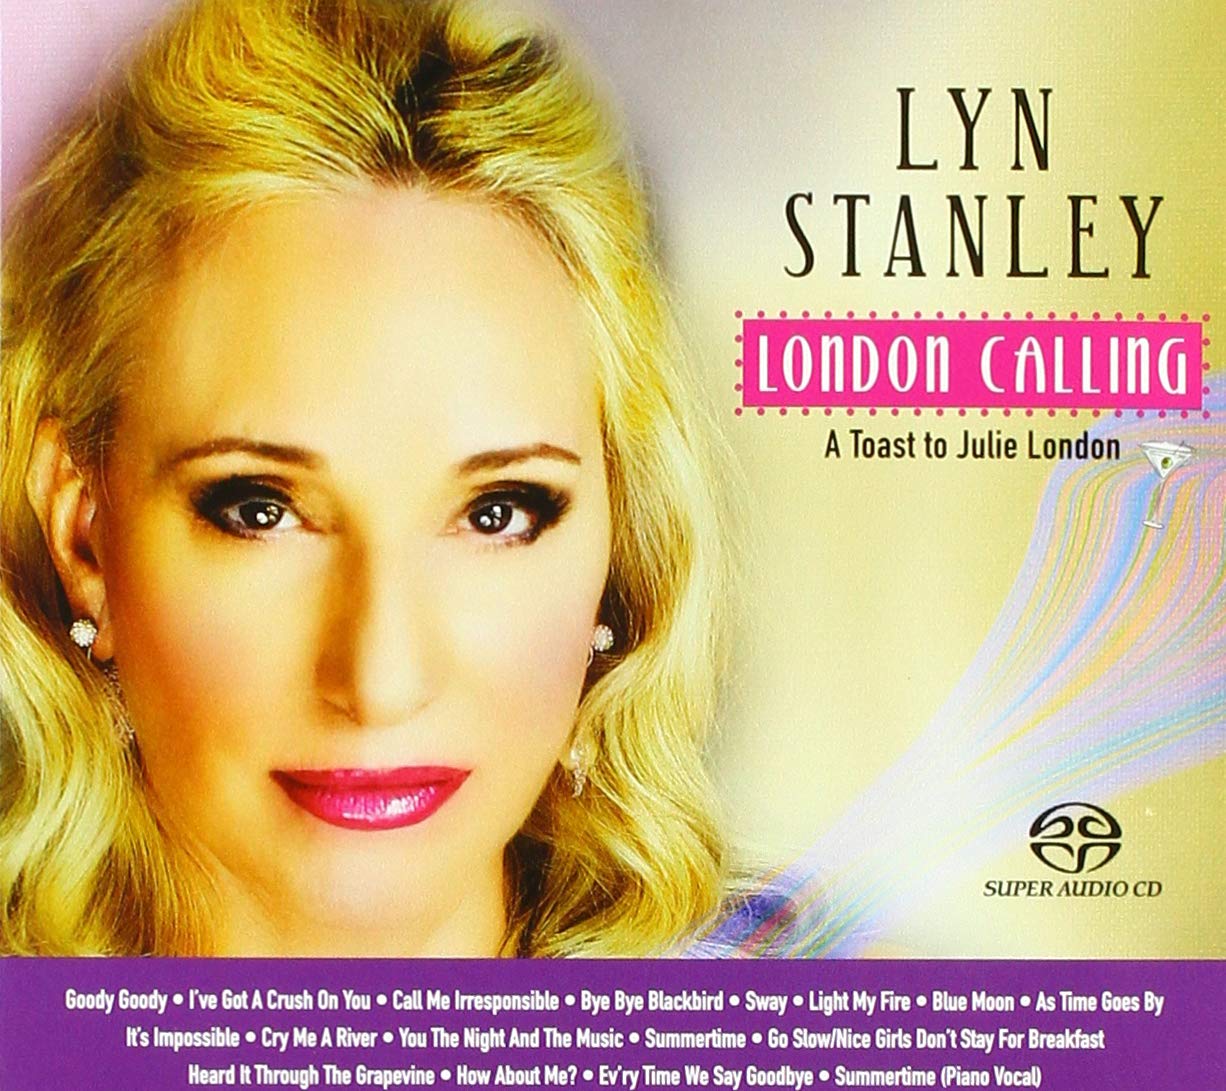 Lyn Stanley – London Calling: A Toast To Julie London (2018) SACD ISO + DSF DSD64 + Hi-Res FLAC